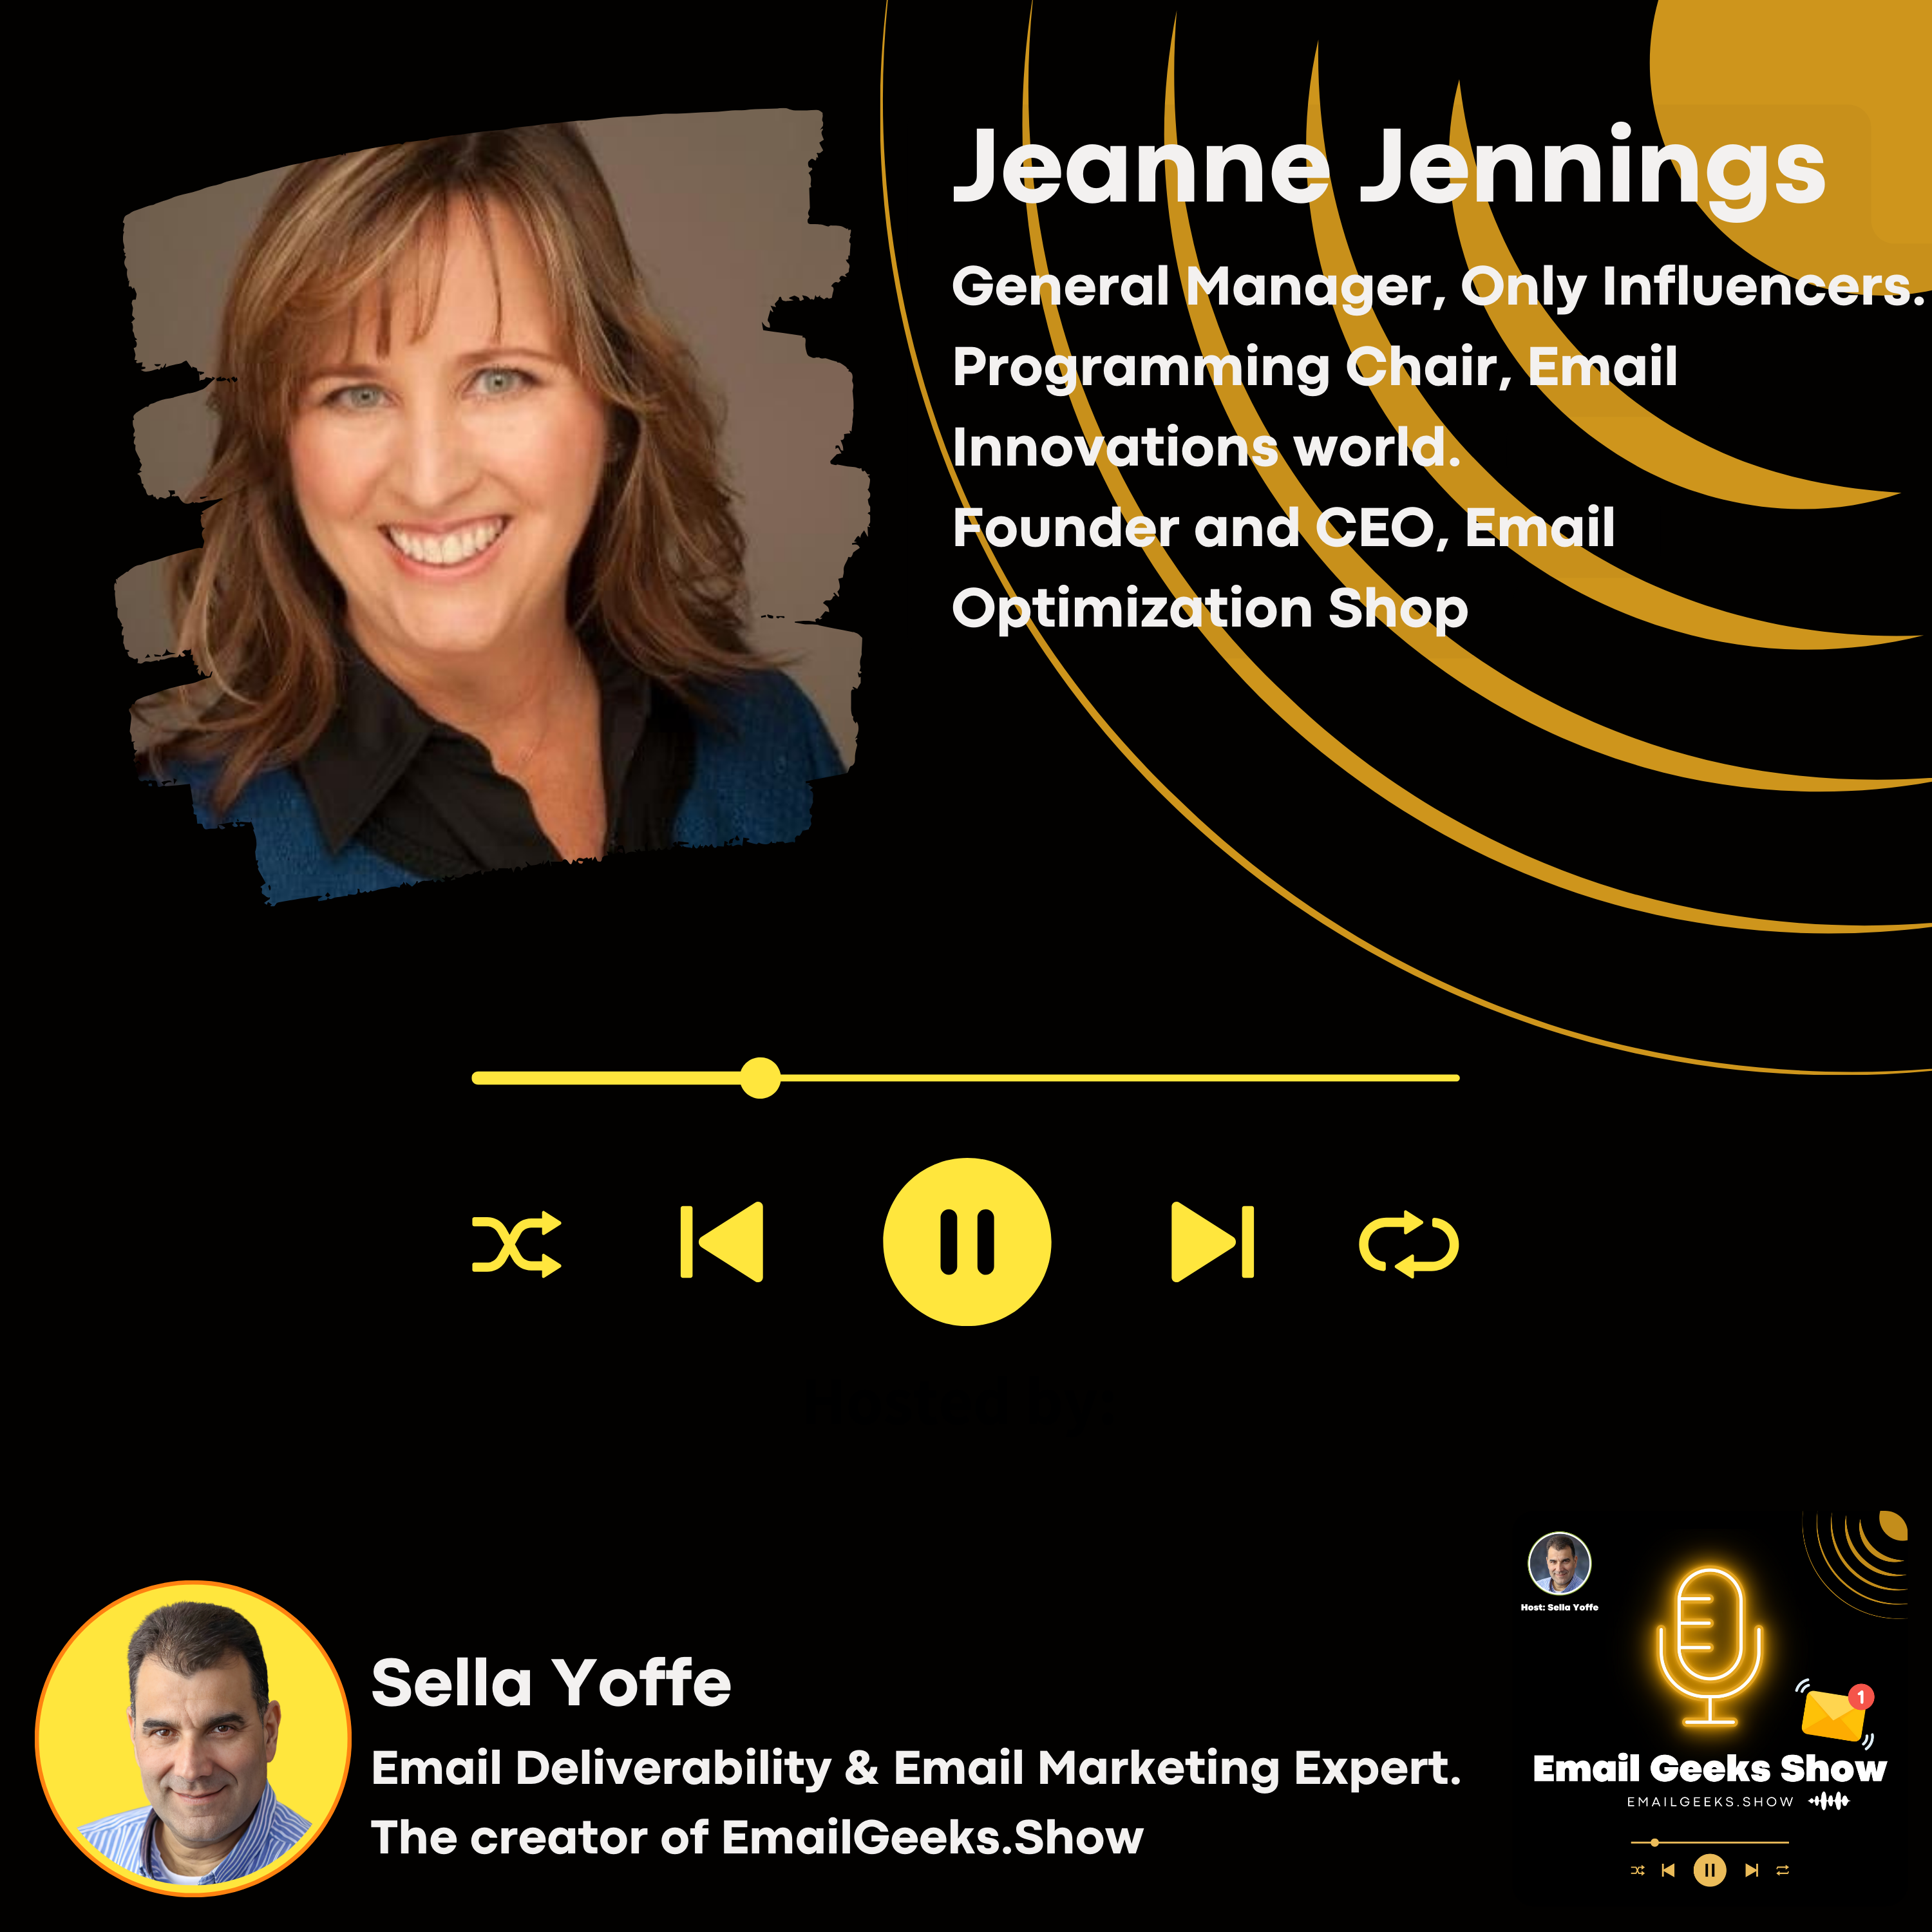 Jeanne Jennings, General Manager of Only Influencers, the original community of email industry professionals